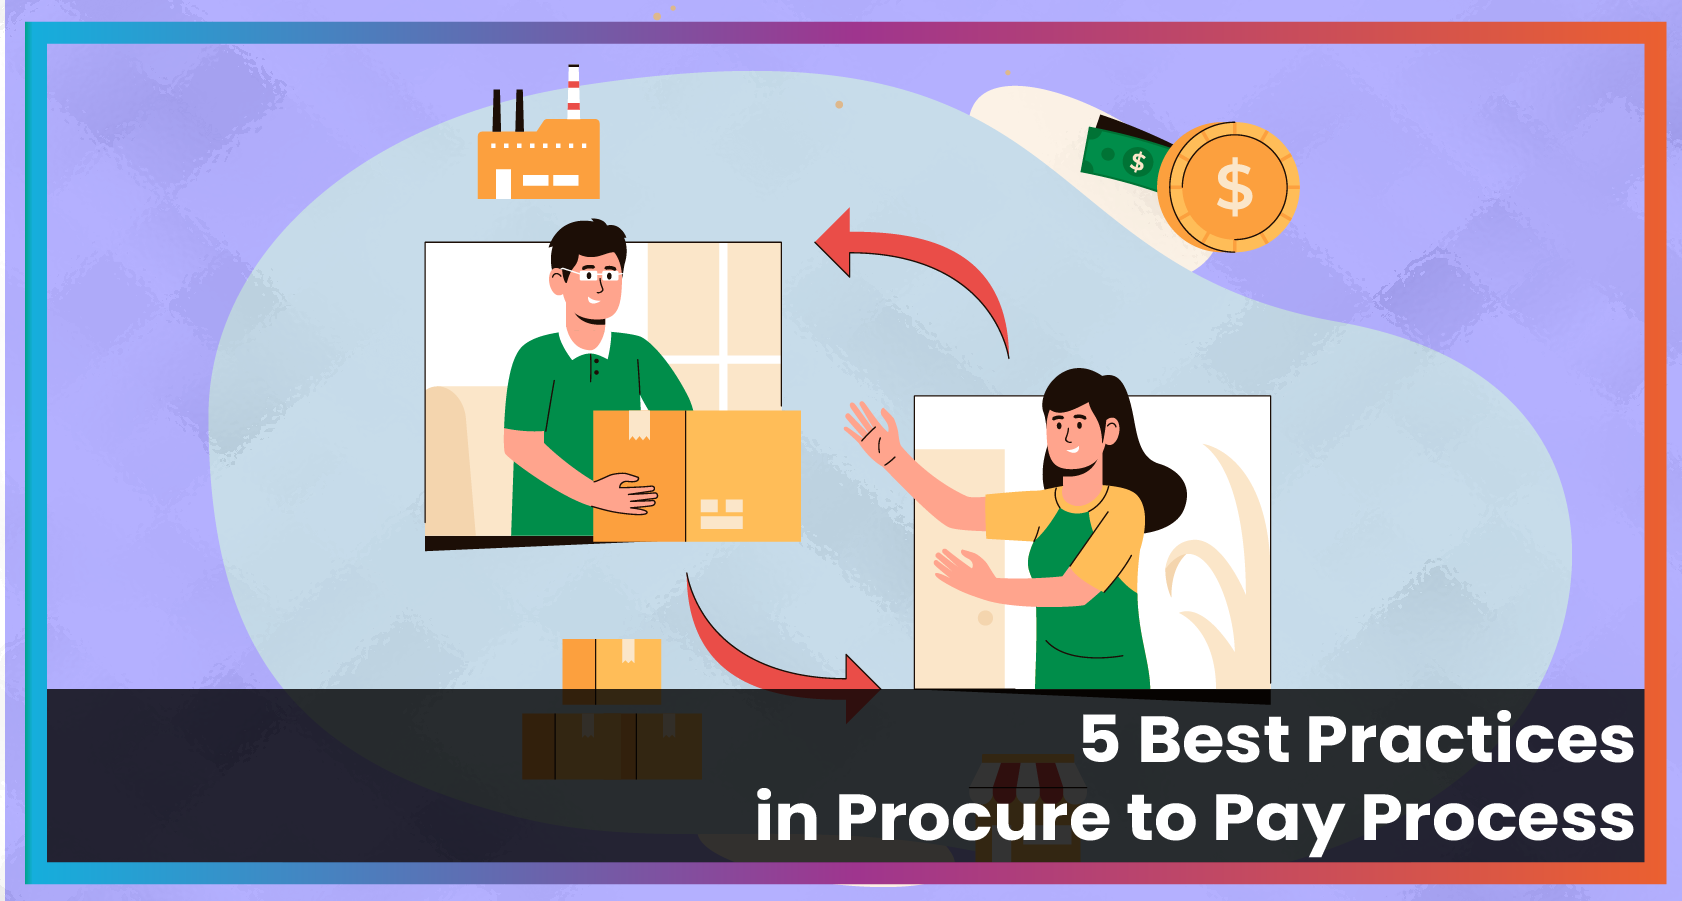 5 Best Practices in Procure-to-Pay (P2P) Process